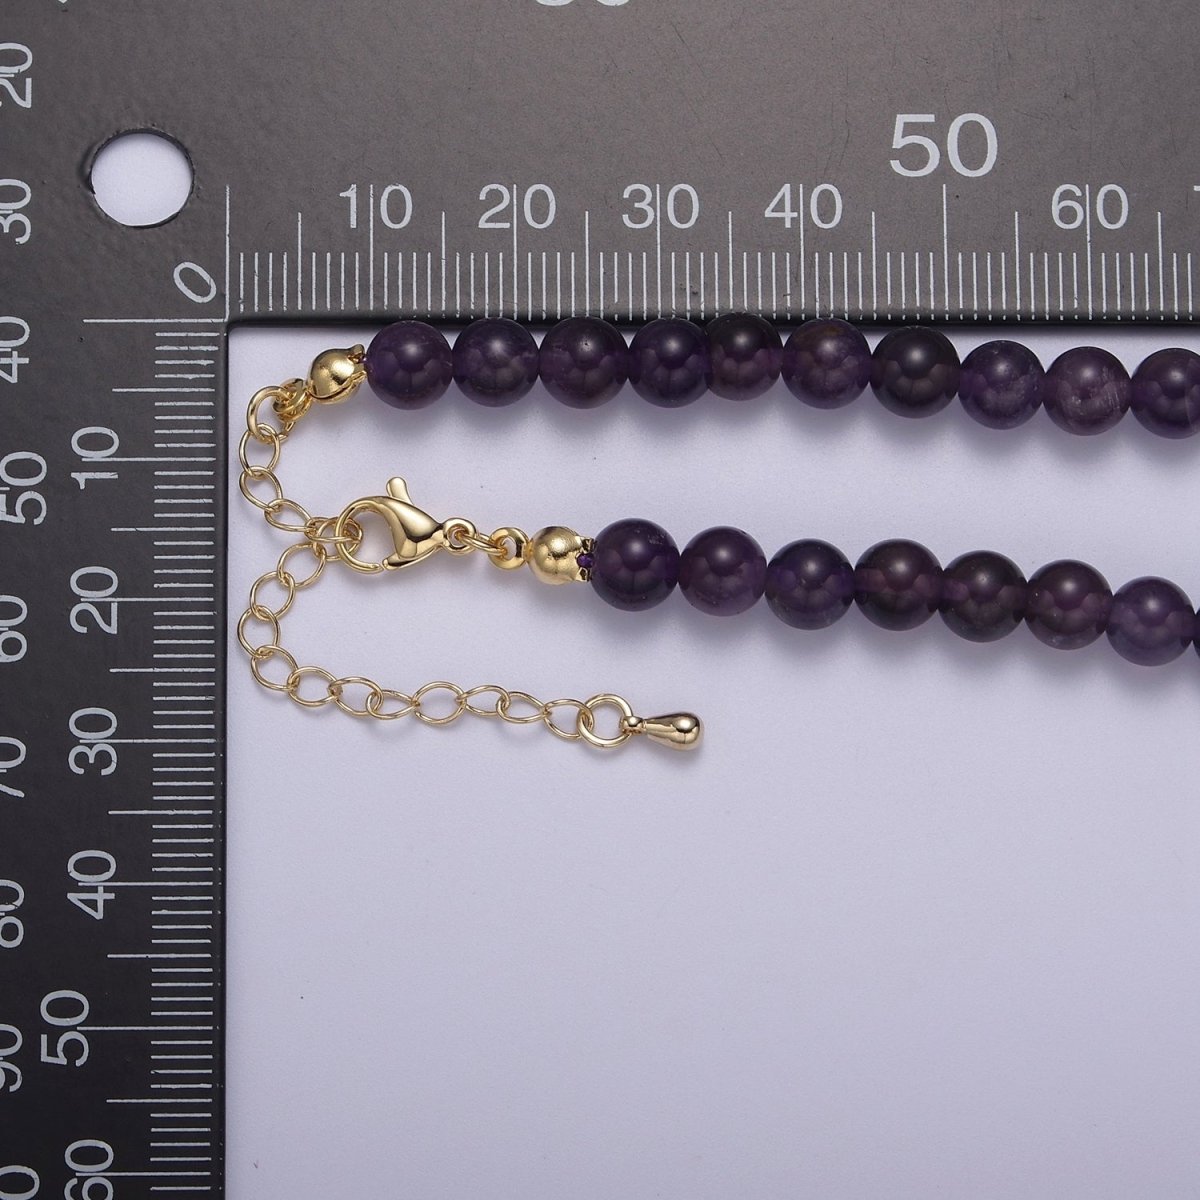 AAA++ Natural Amethyst Beaded Necklace, 6mm Purple Amethyst Smooth Round Bead Necklace 18k Gold Filled Gemstone Necklace Jewelry | WA-858 Clearance Pricing - DLUXCA